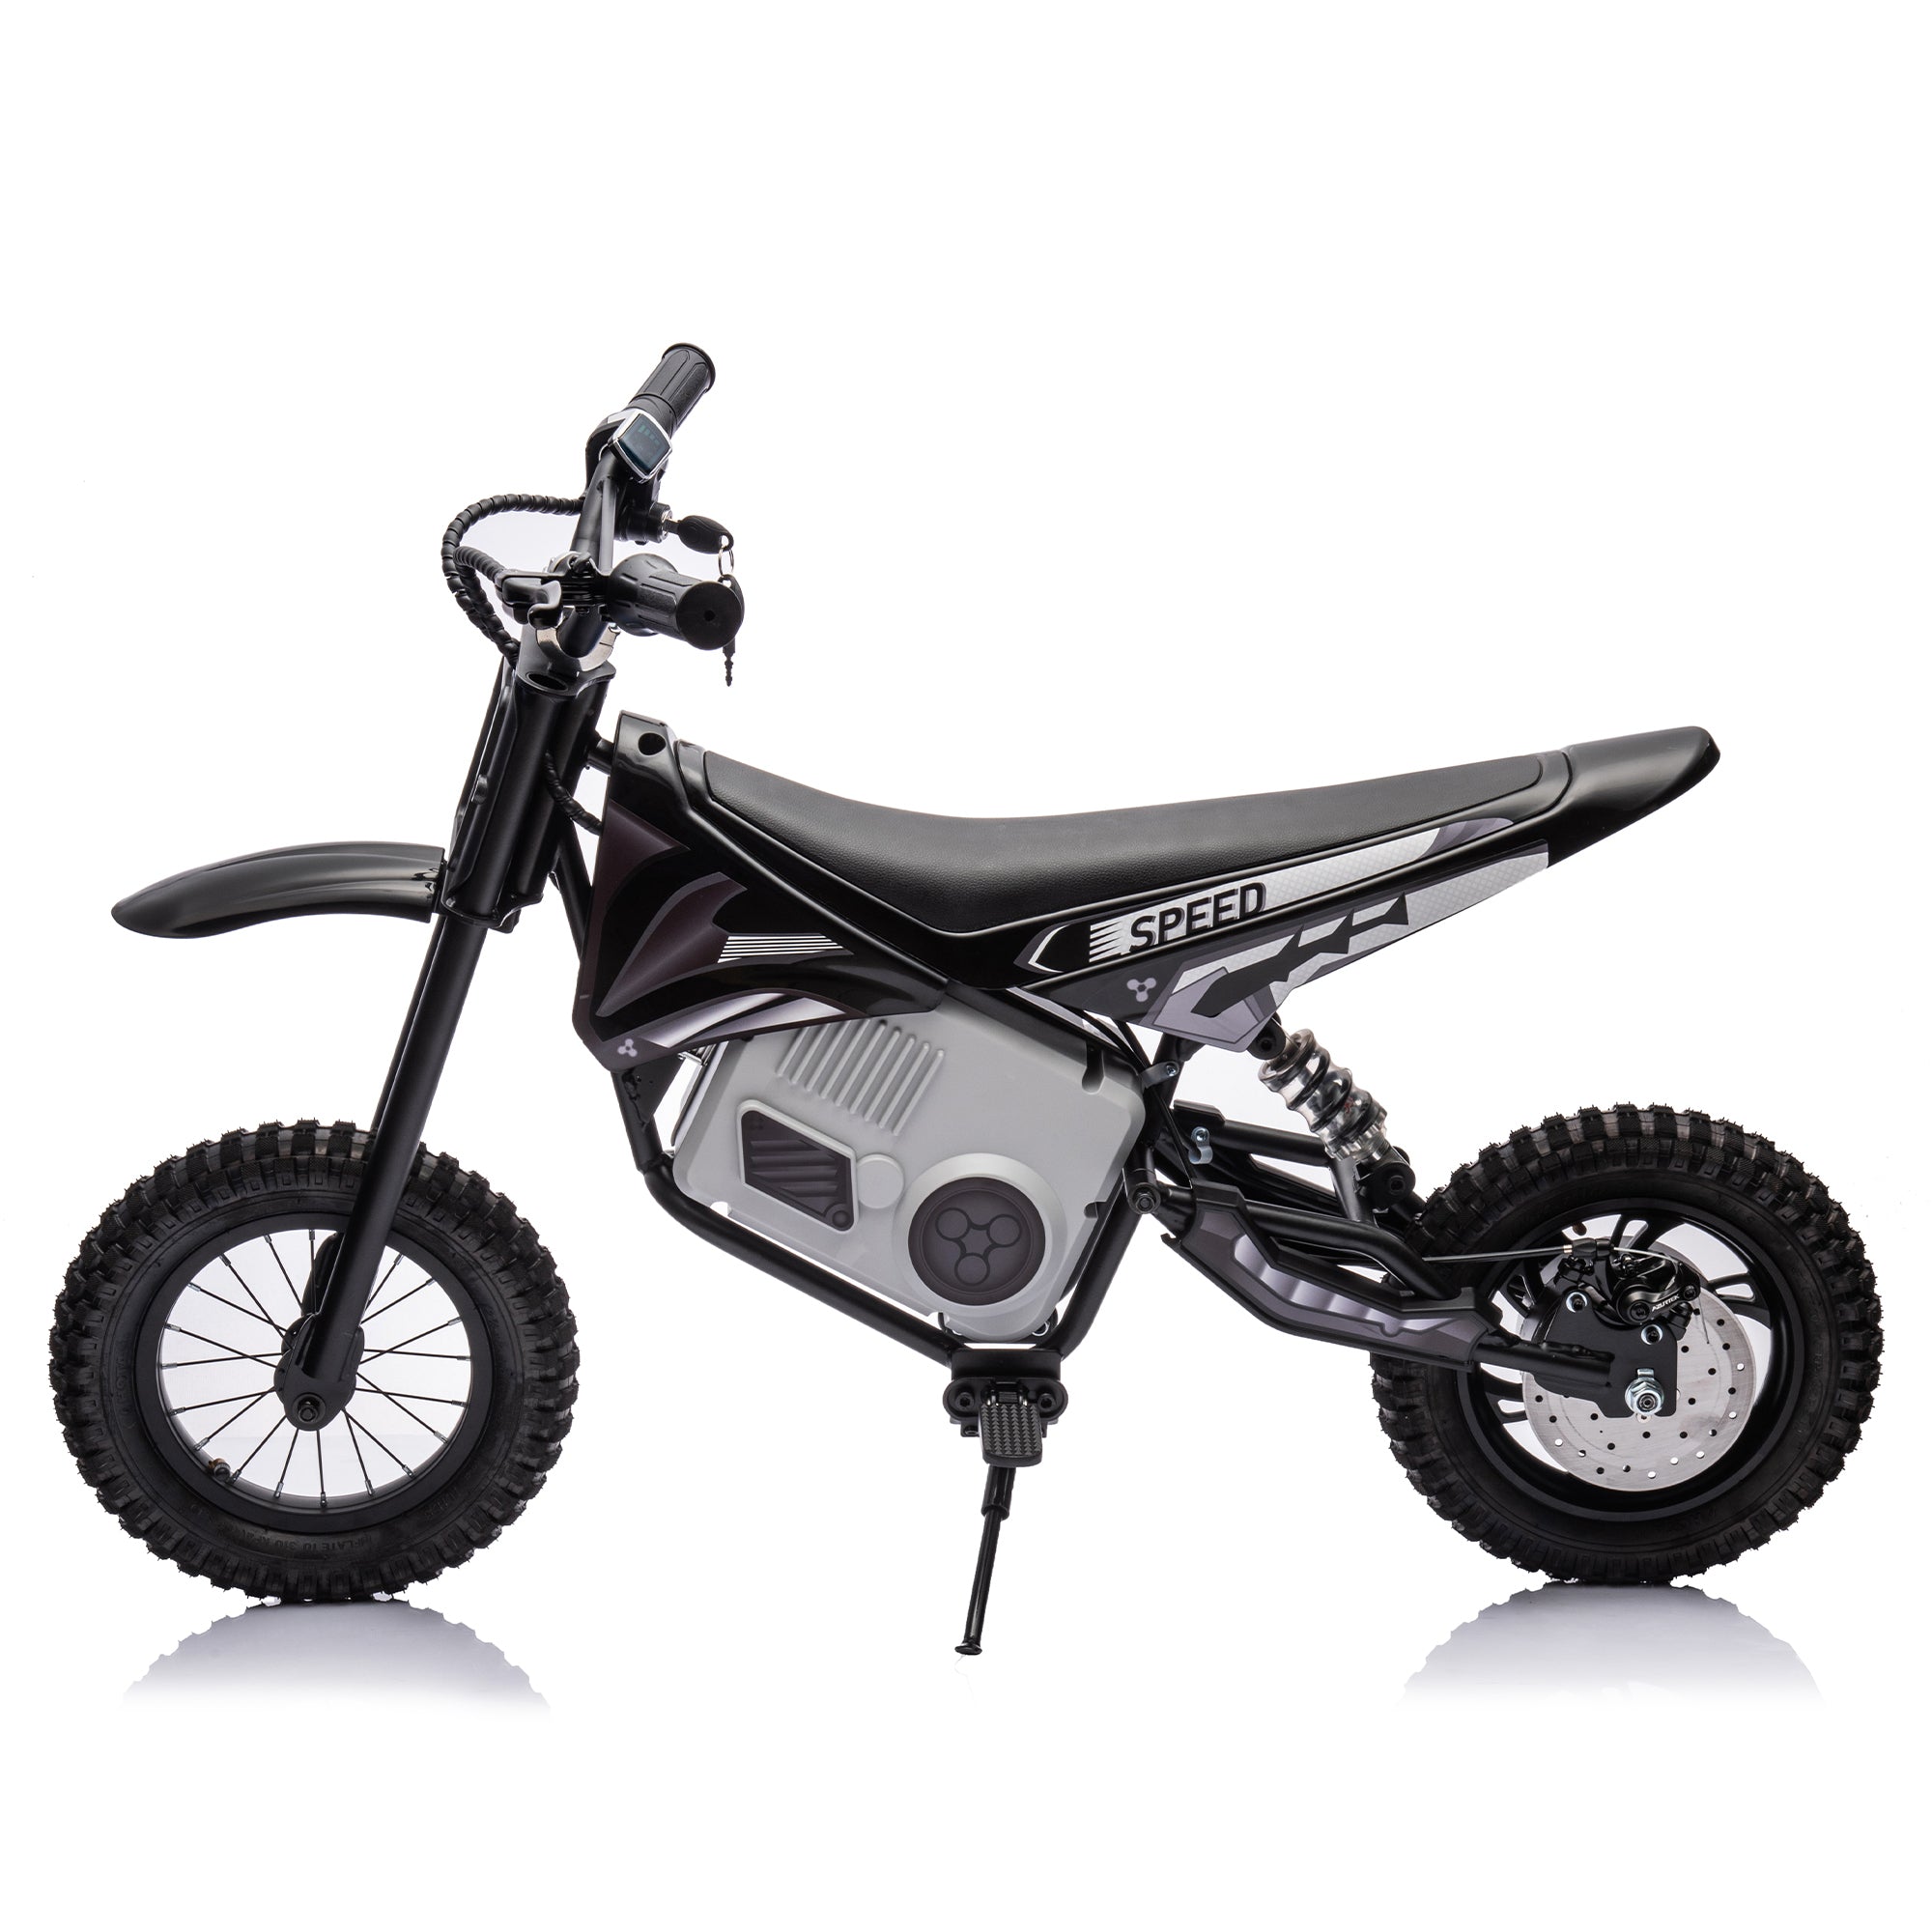 🆓🚛 36V Electric Mini Dirt Motorcycle for Kids, 350W Xxxl Motorcycle, Stepless Variable Speed Drive, Disc Brake, No Chain, Steady Acceleration, Horn, Power Display, Rate Display, 176 Pounds for 50M Or More, Age 14+, Black